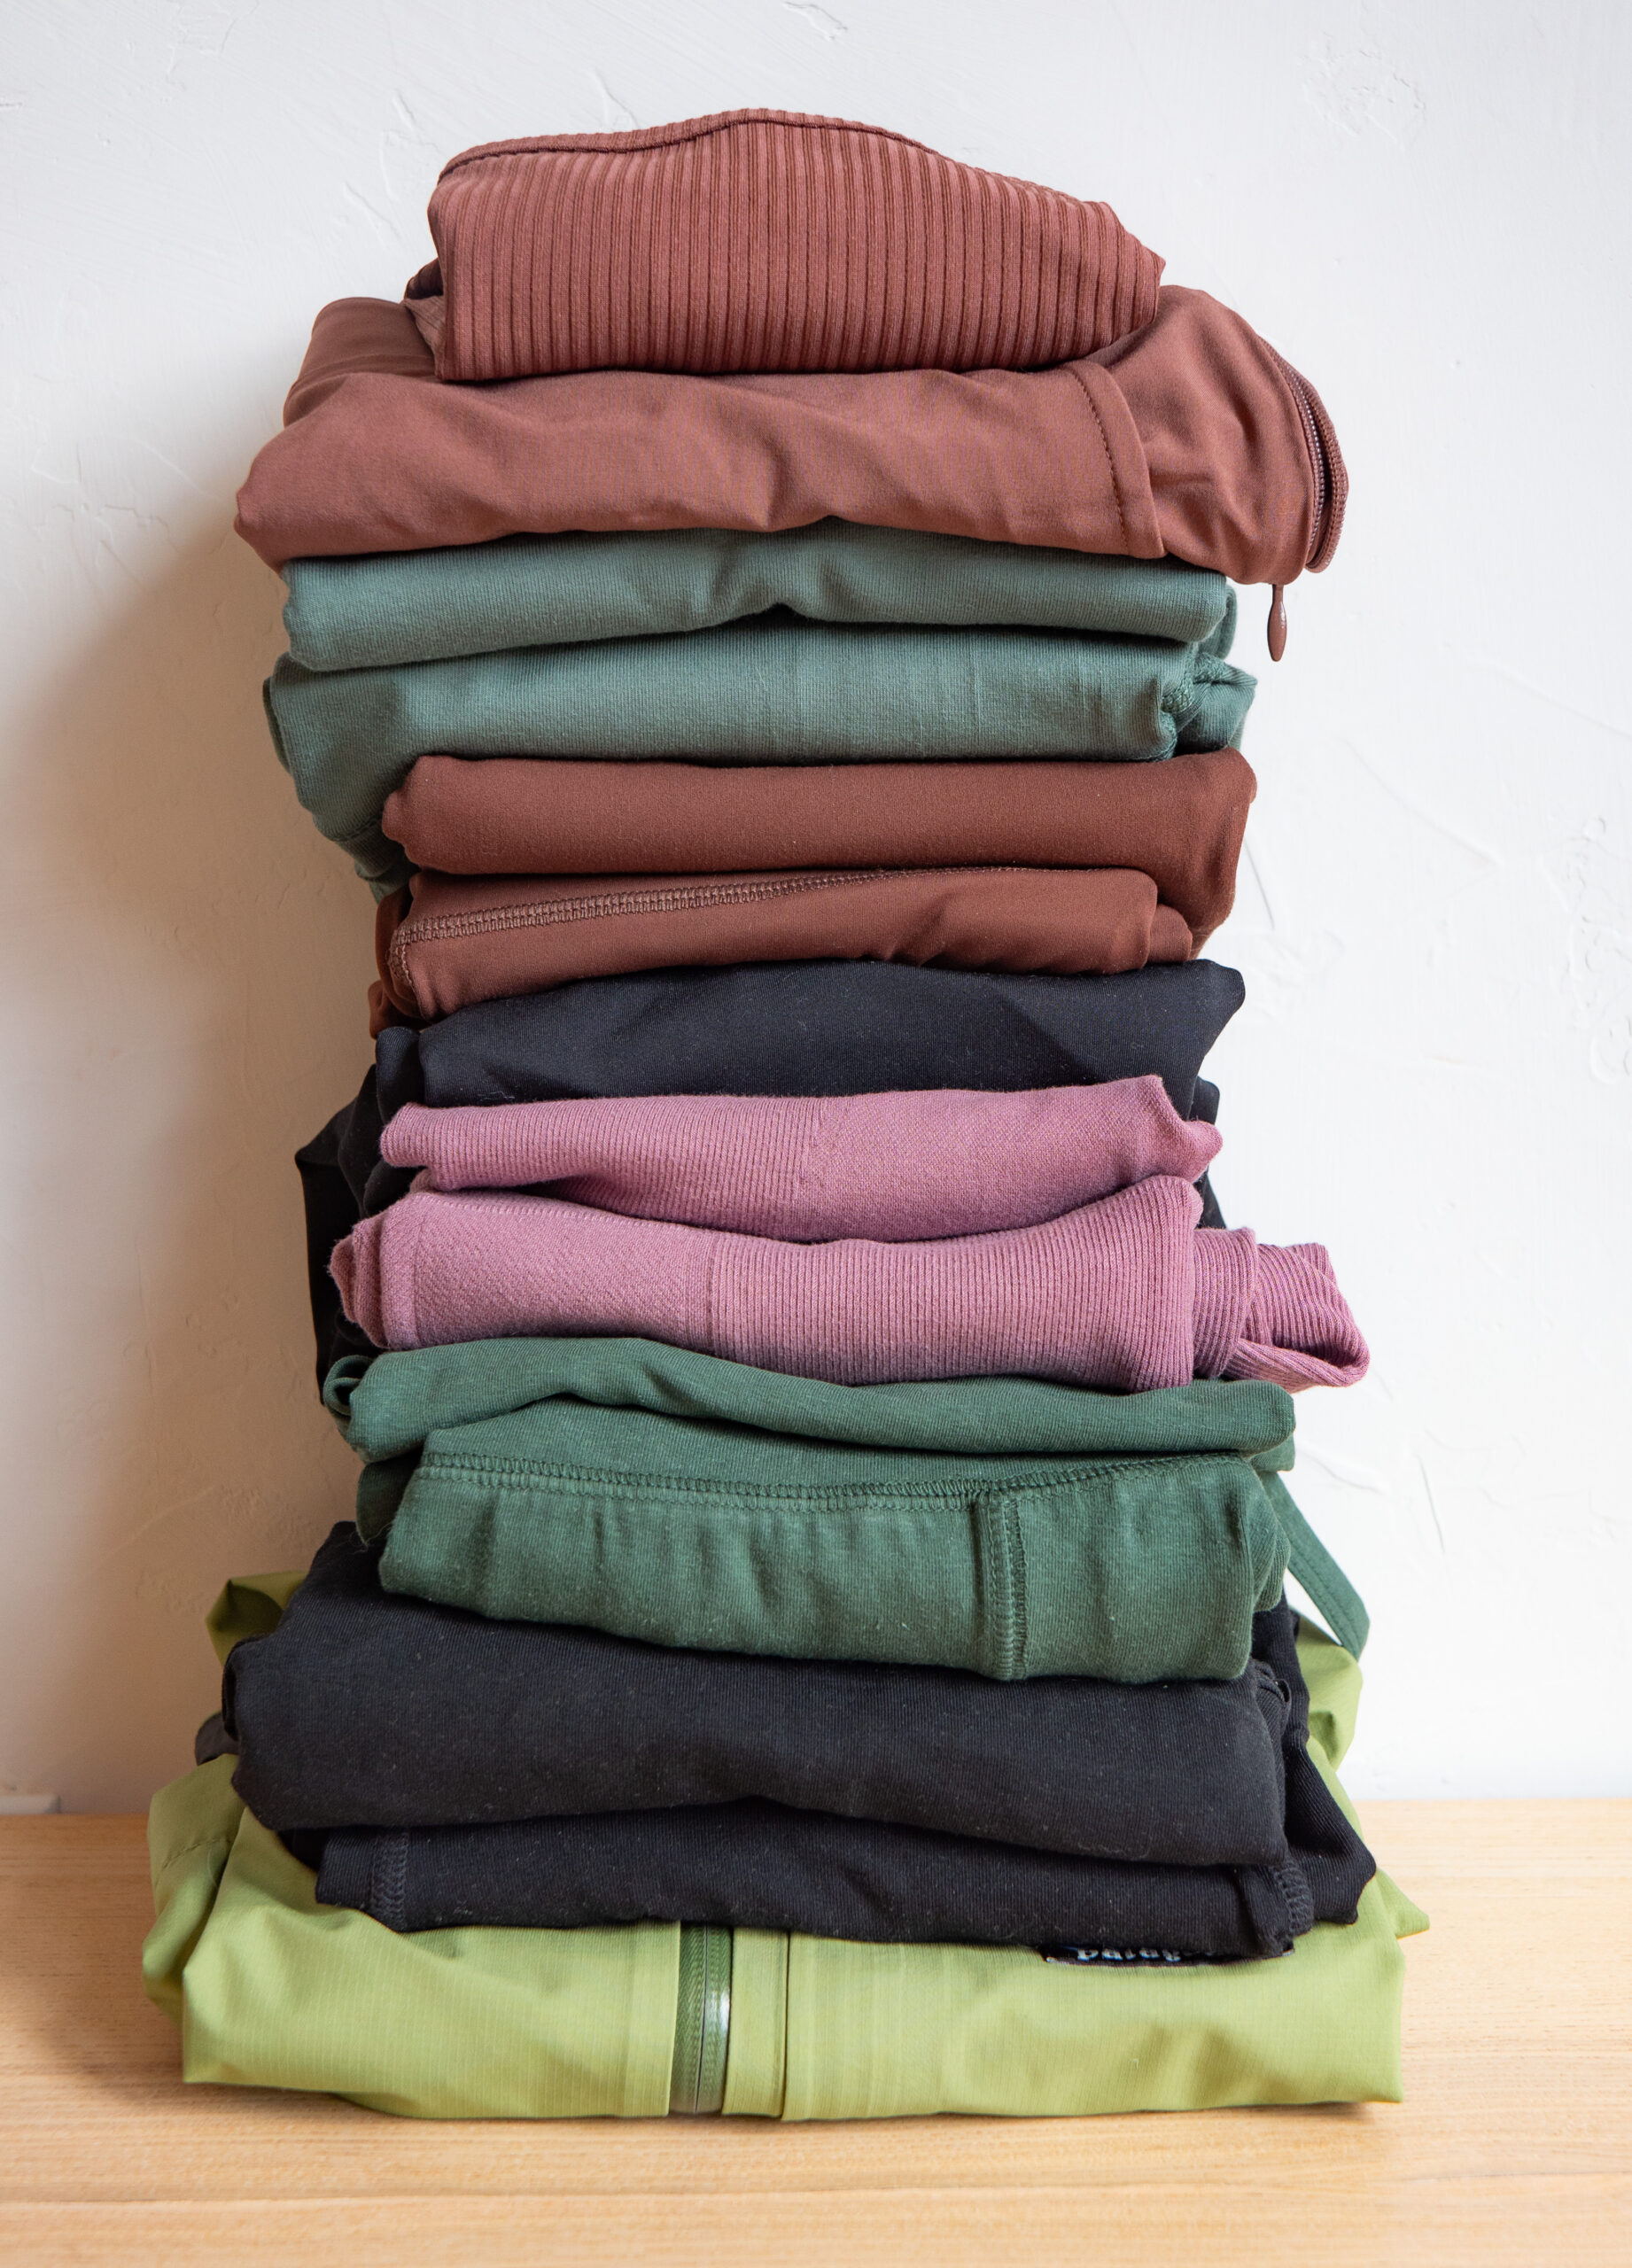 A neat stack of folded clothes in various colors including green, black, pink, and brown against a plain background.